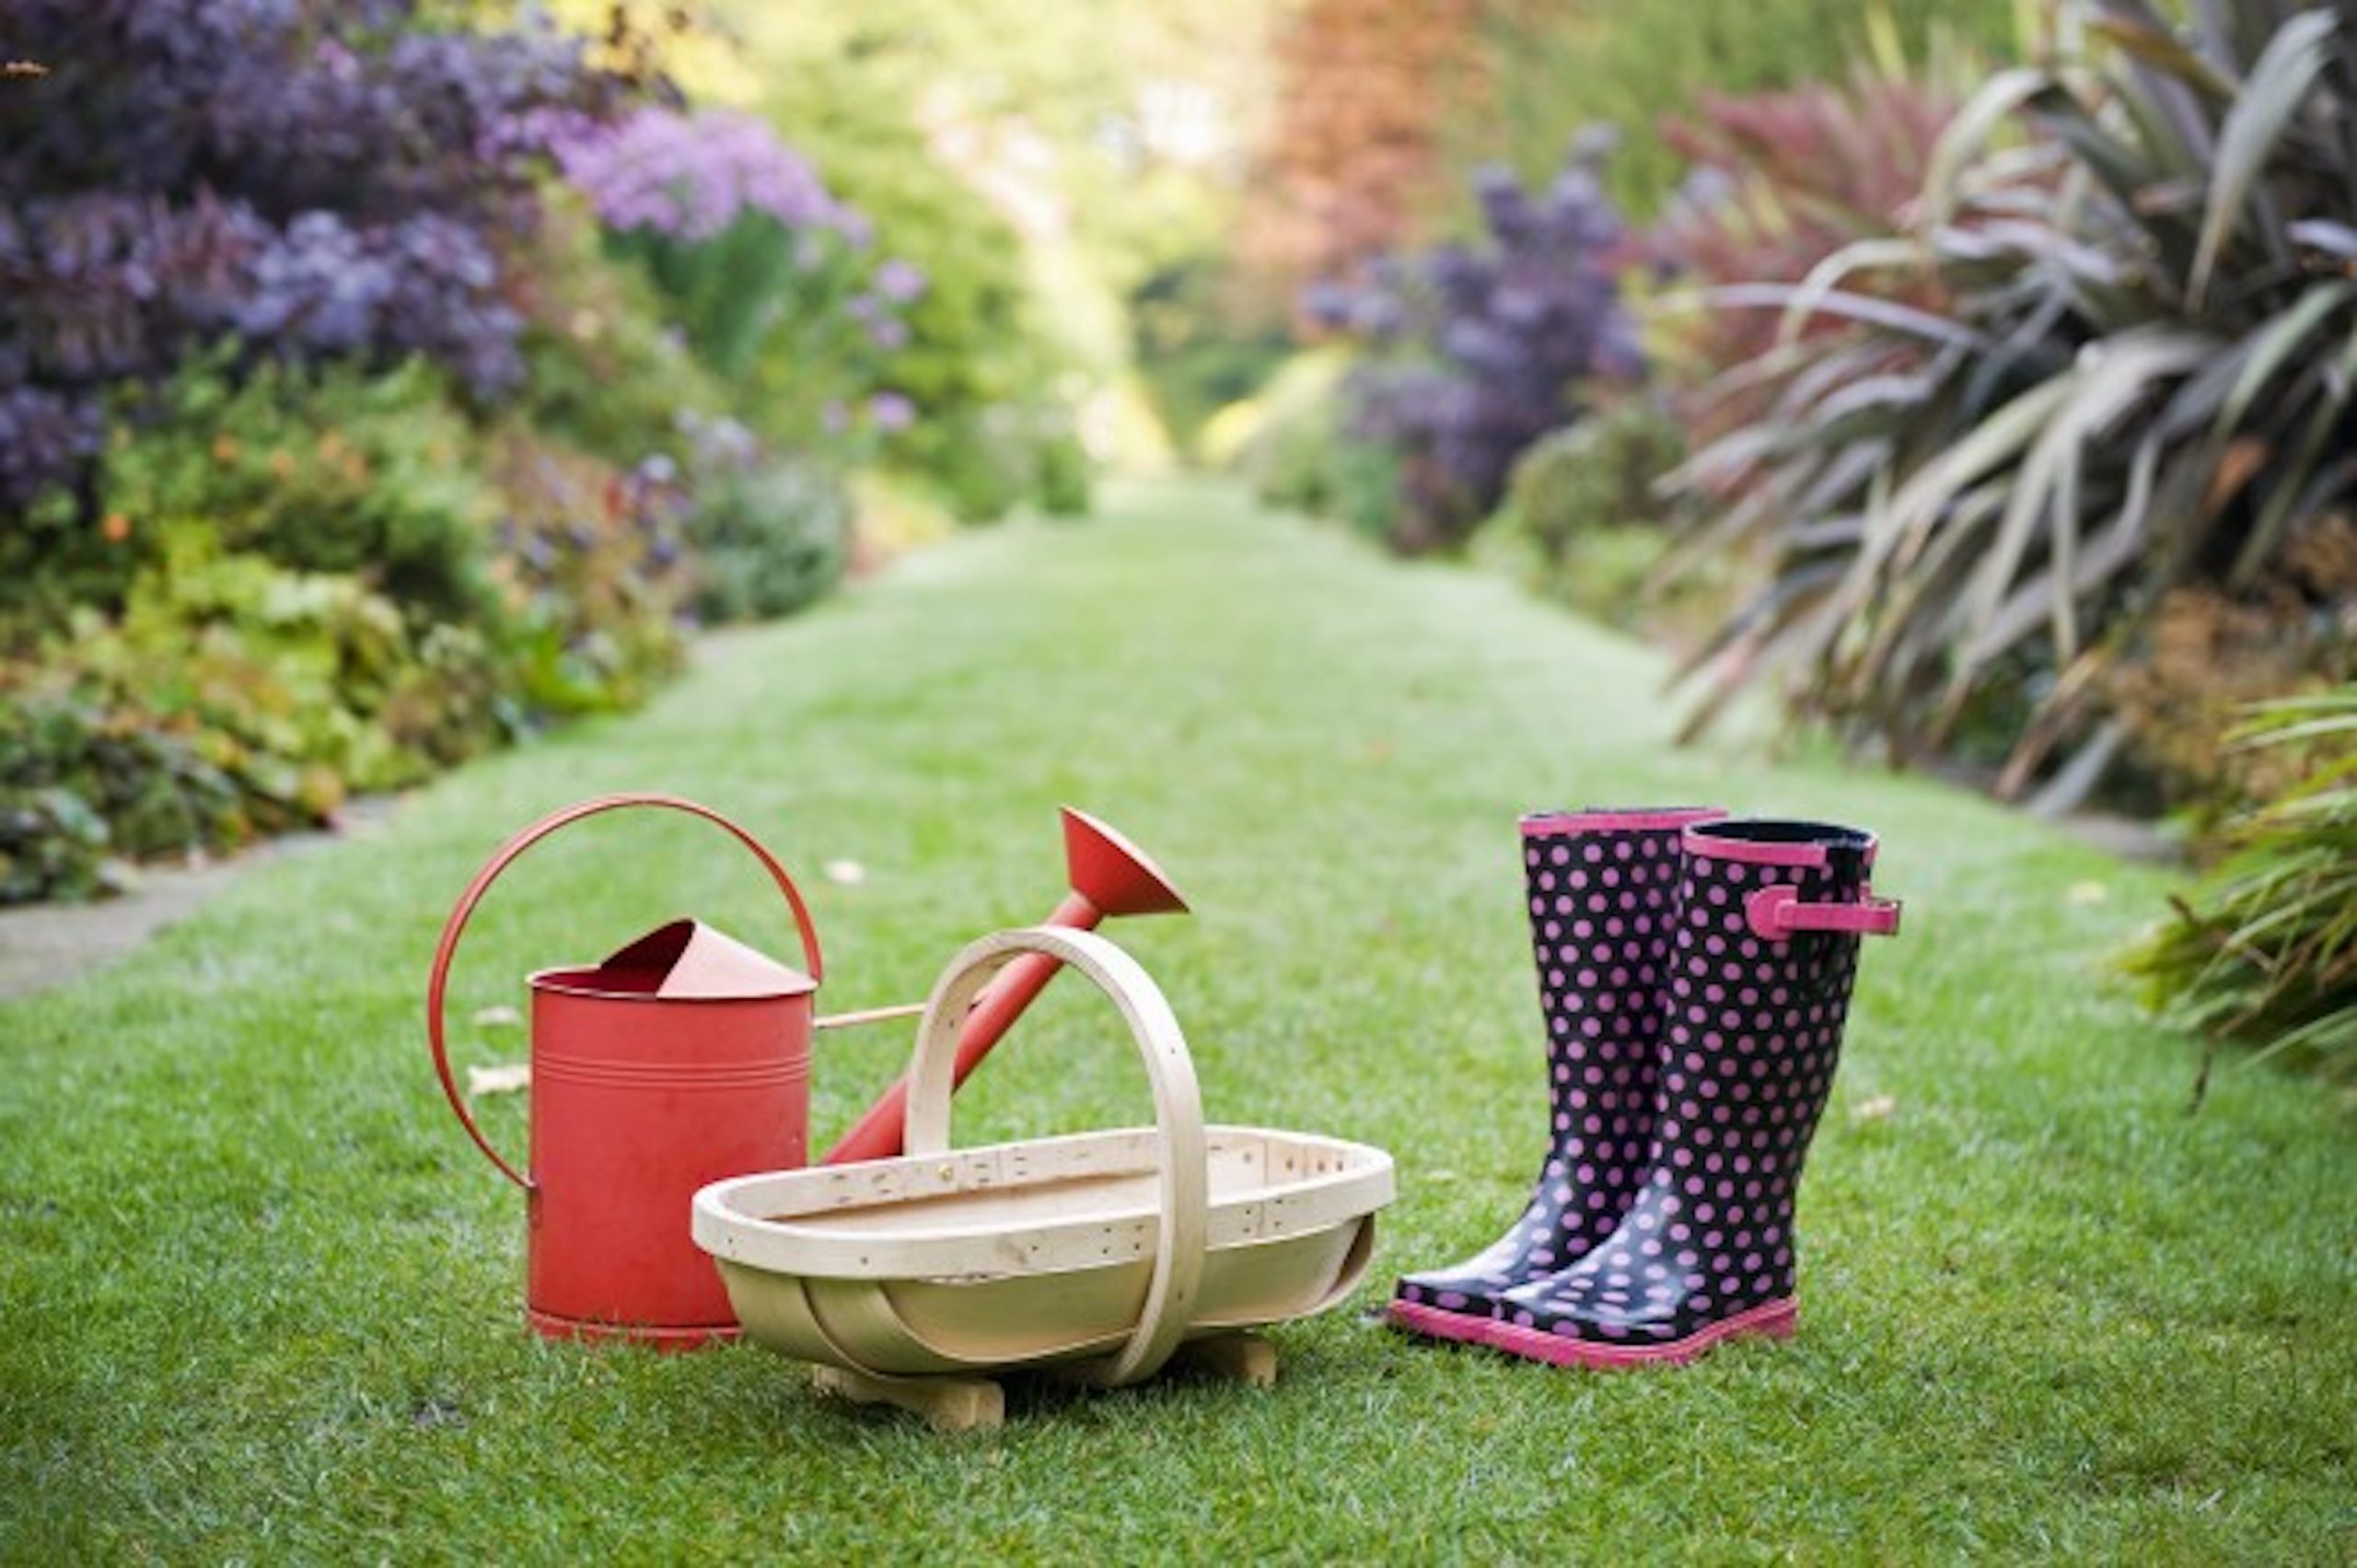 April Gardening Tips cover photo with boots and watering can in garden